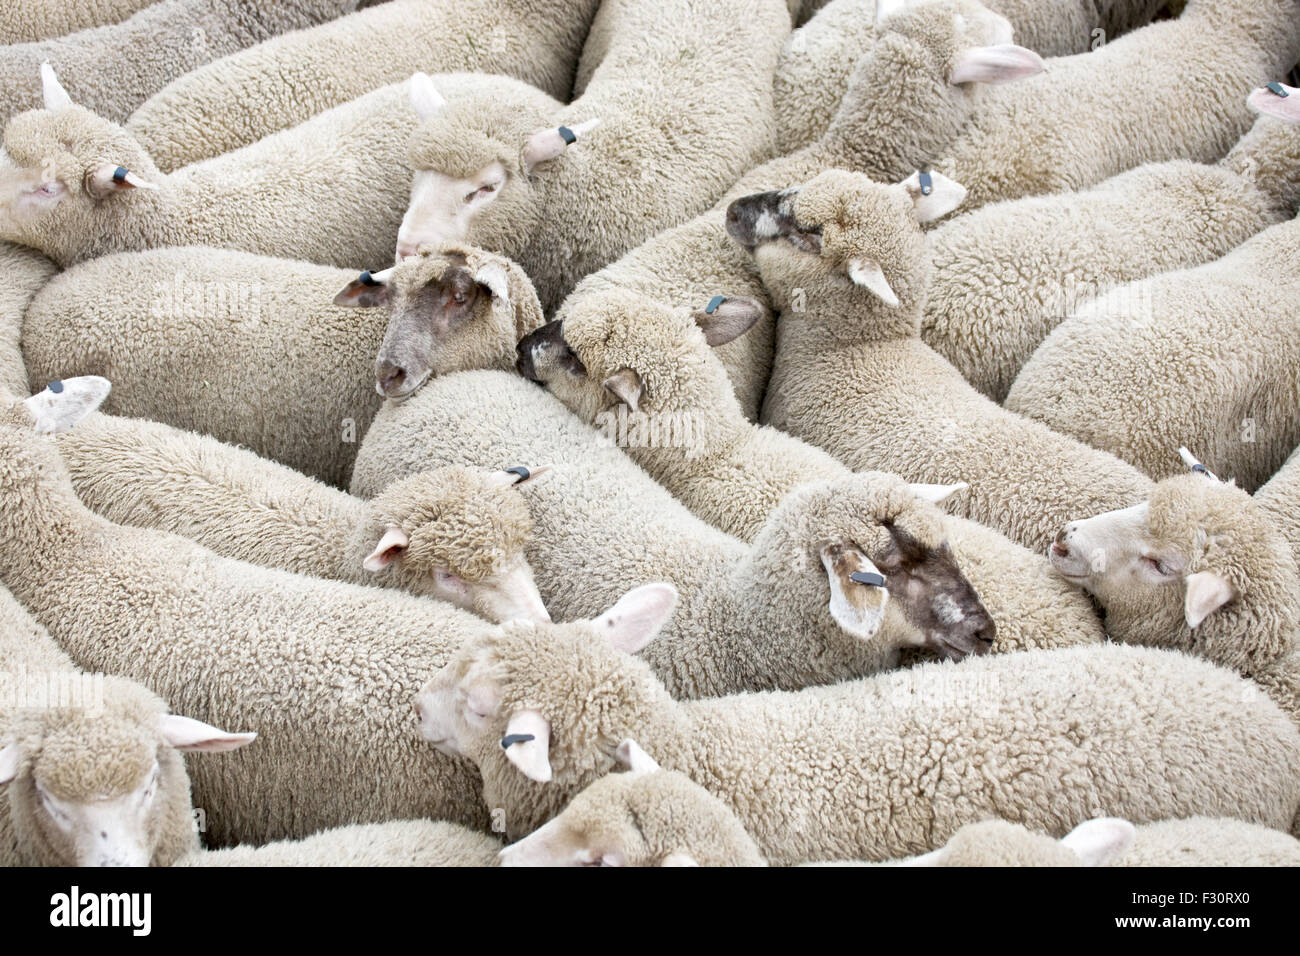 Herd of sheep on a truck Stock Photo